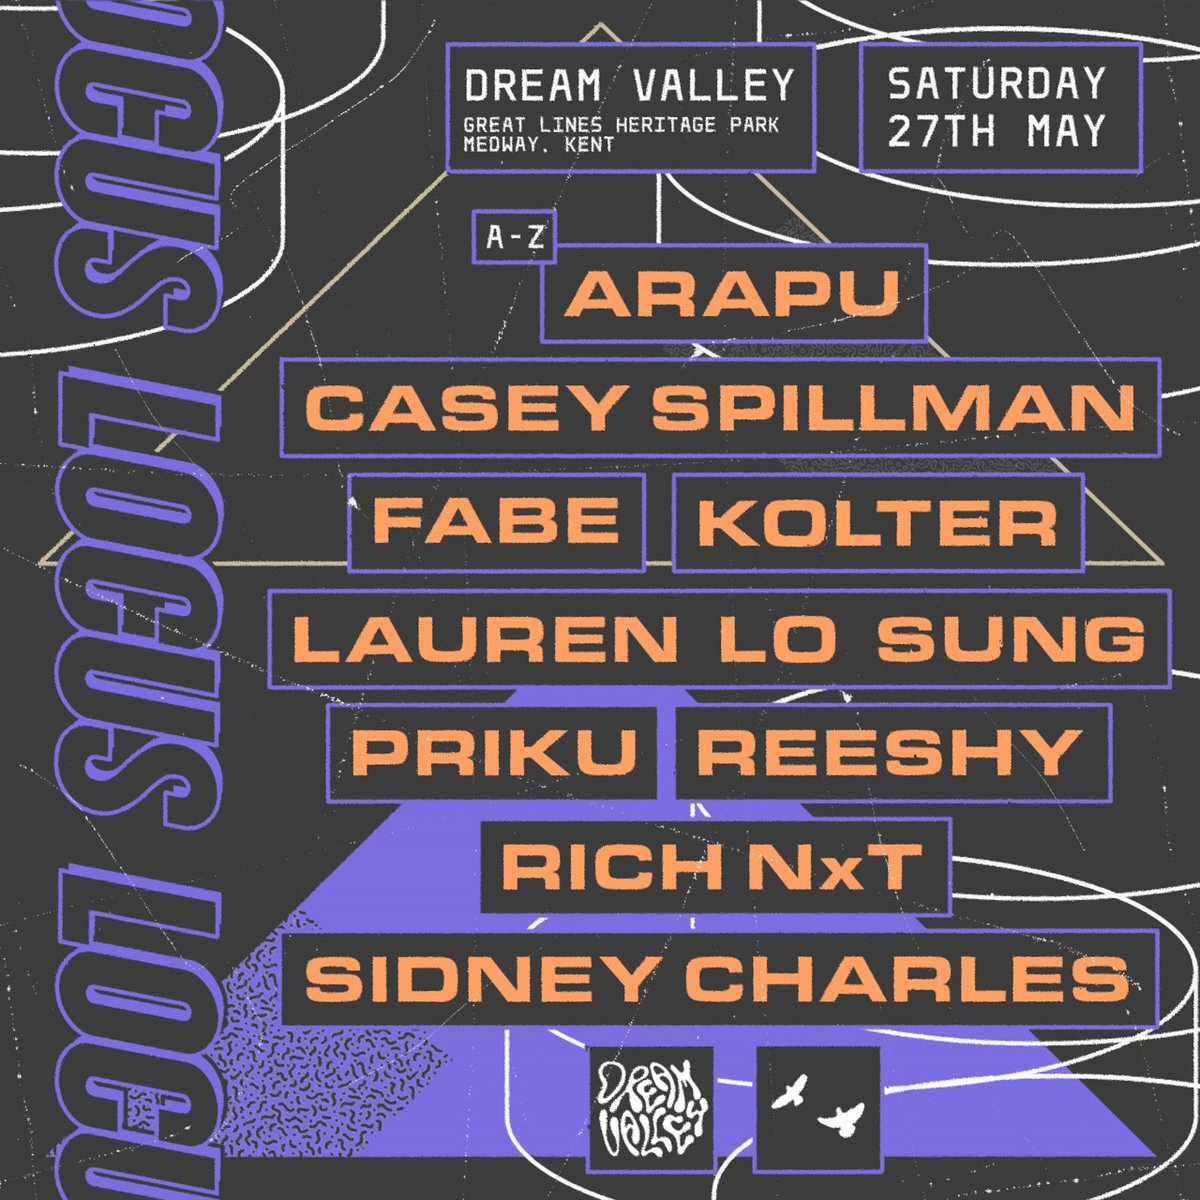 LOCUS x DREAM VALLEY! 💭 Saturday 27th May we debut at @Dreamvalleyuk! 🌞 Landing at Great Lines Heritage Park in Kent, we're bringing a stacked lineup to the open air! 🦋